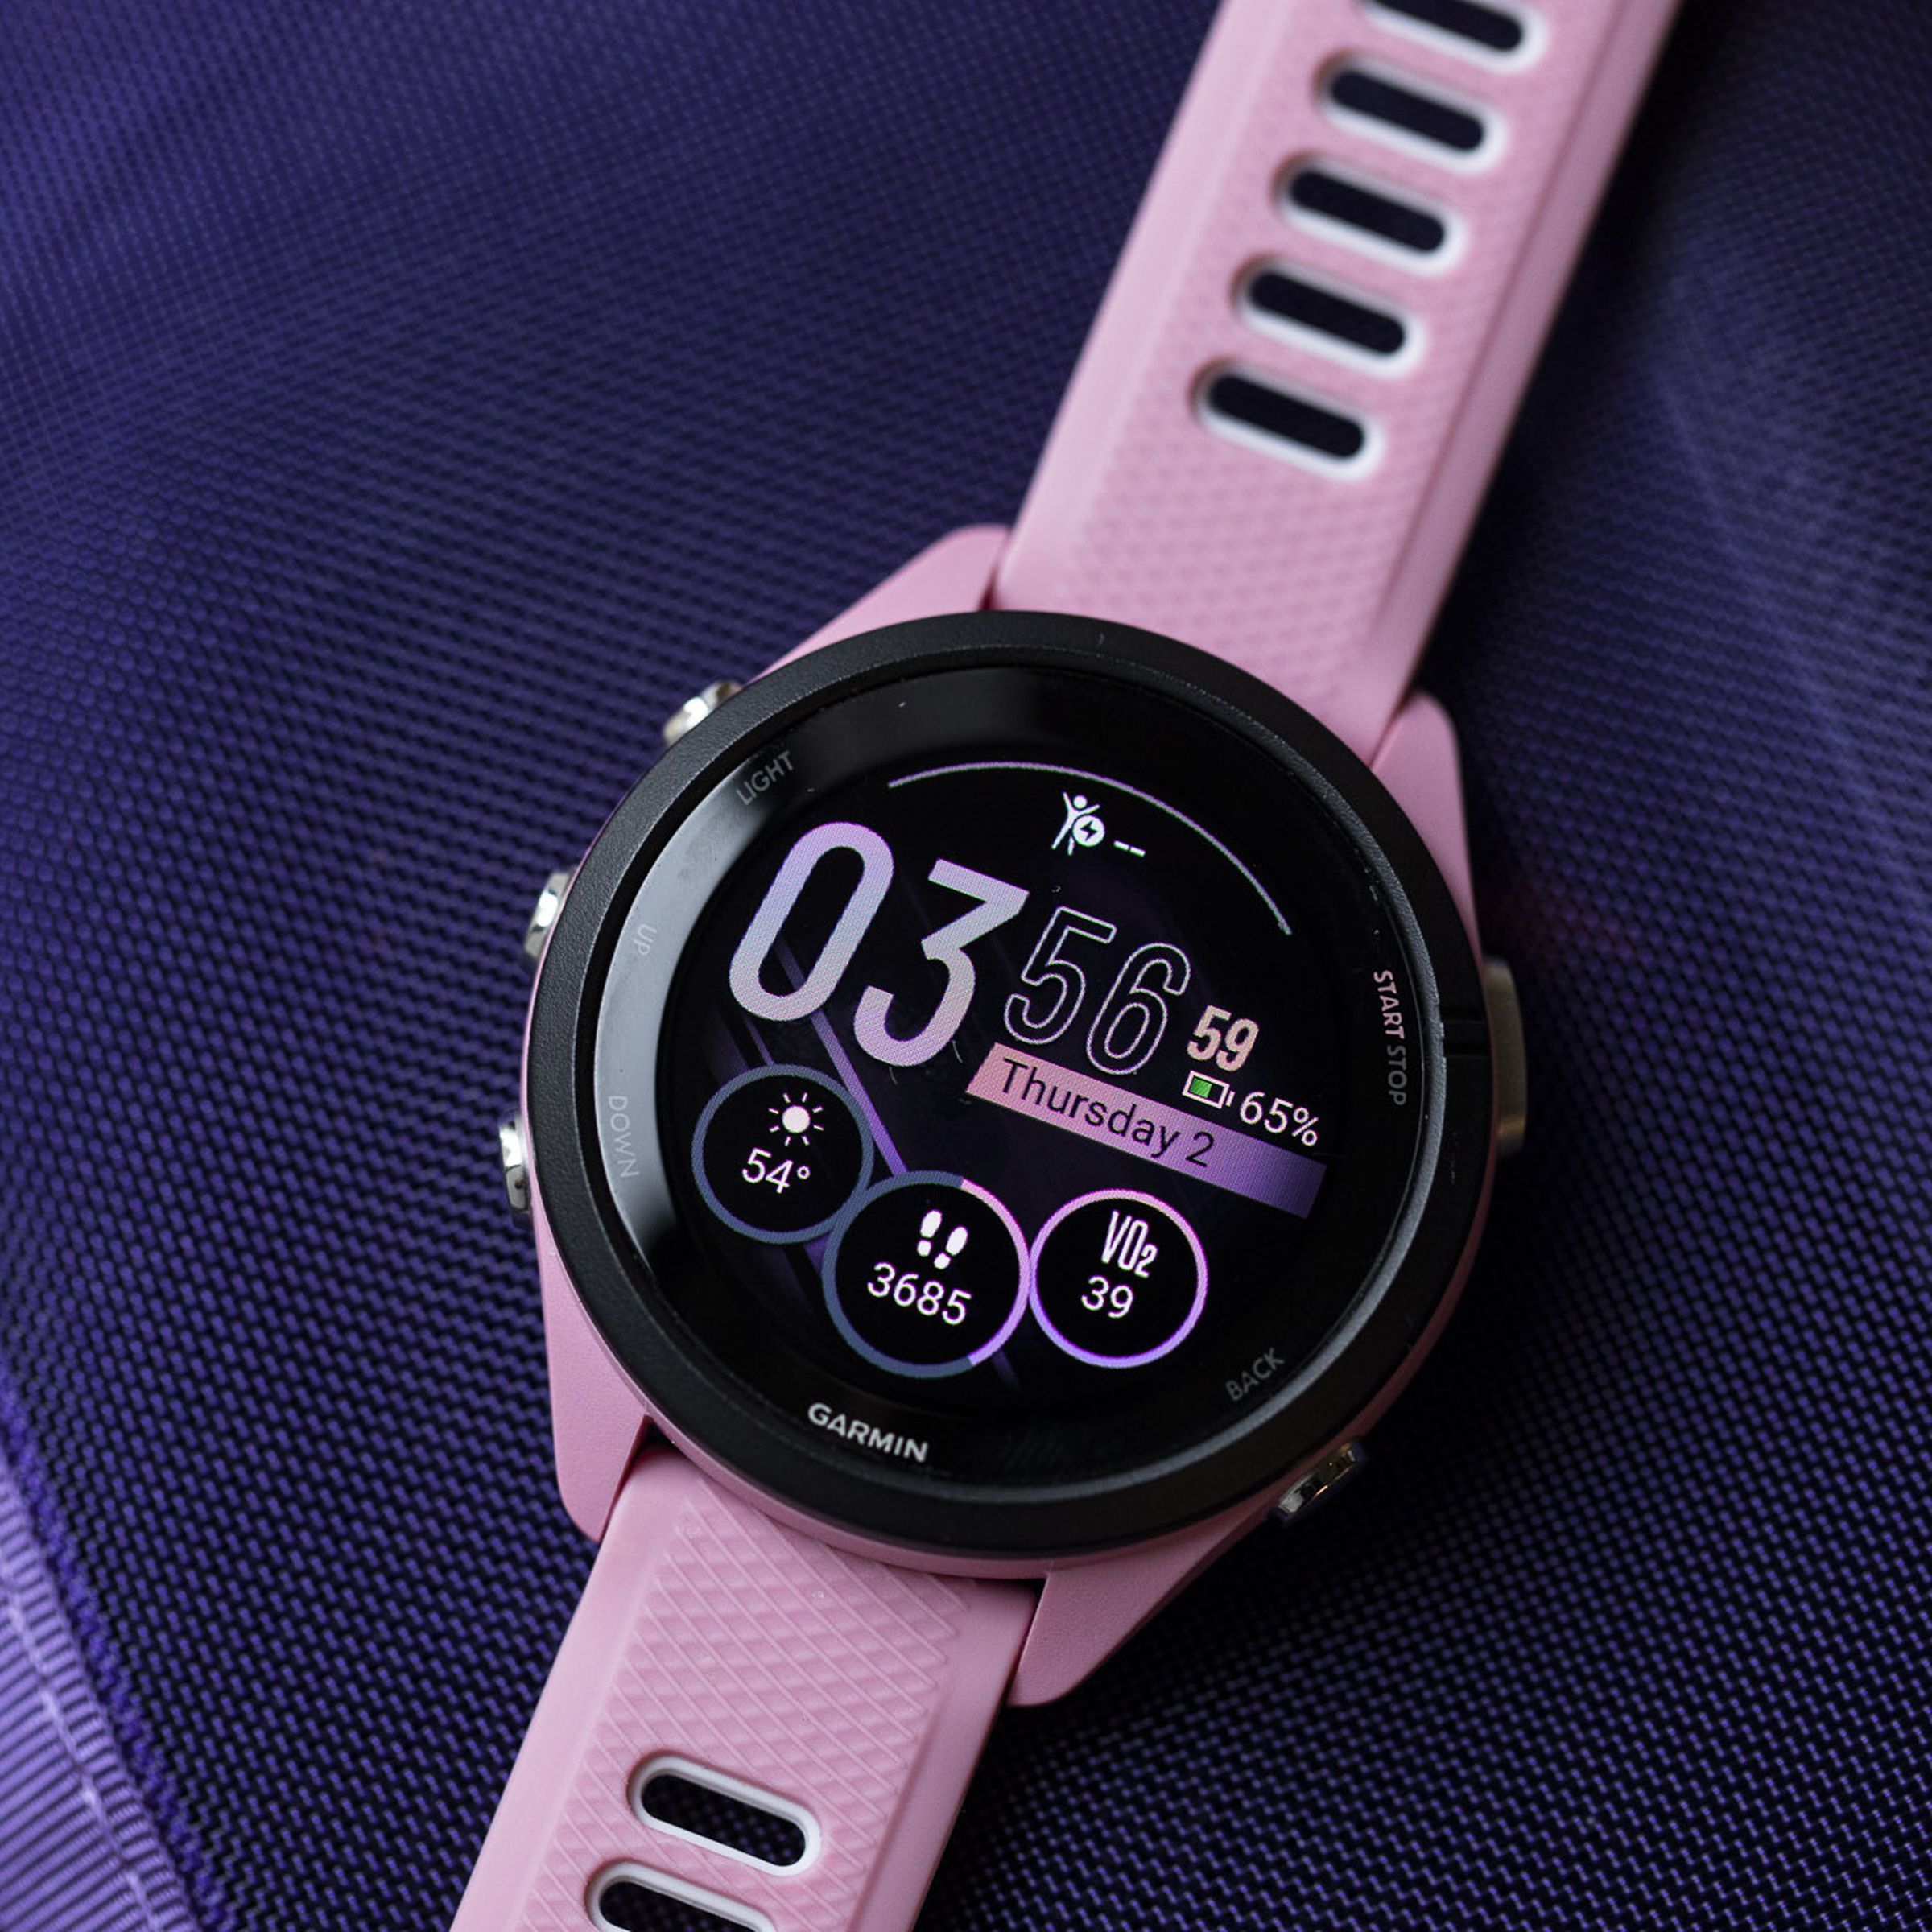 Close-up of the Garmin Forerunner 265S’s OLED display and watchface on a purple background